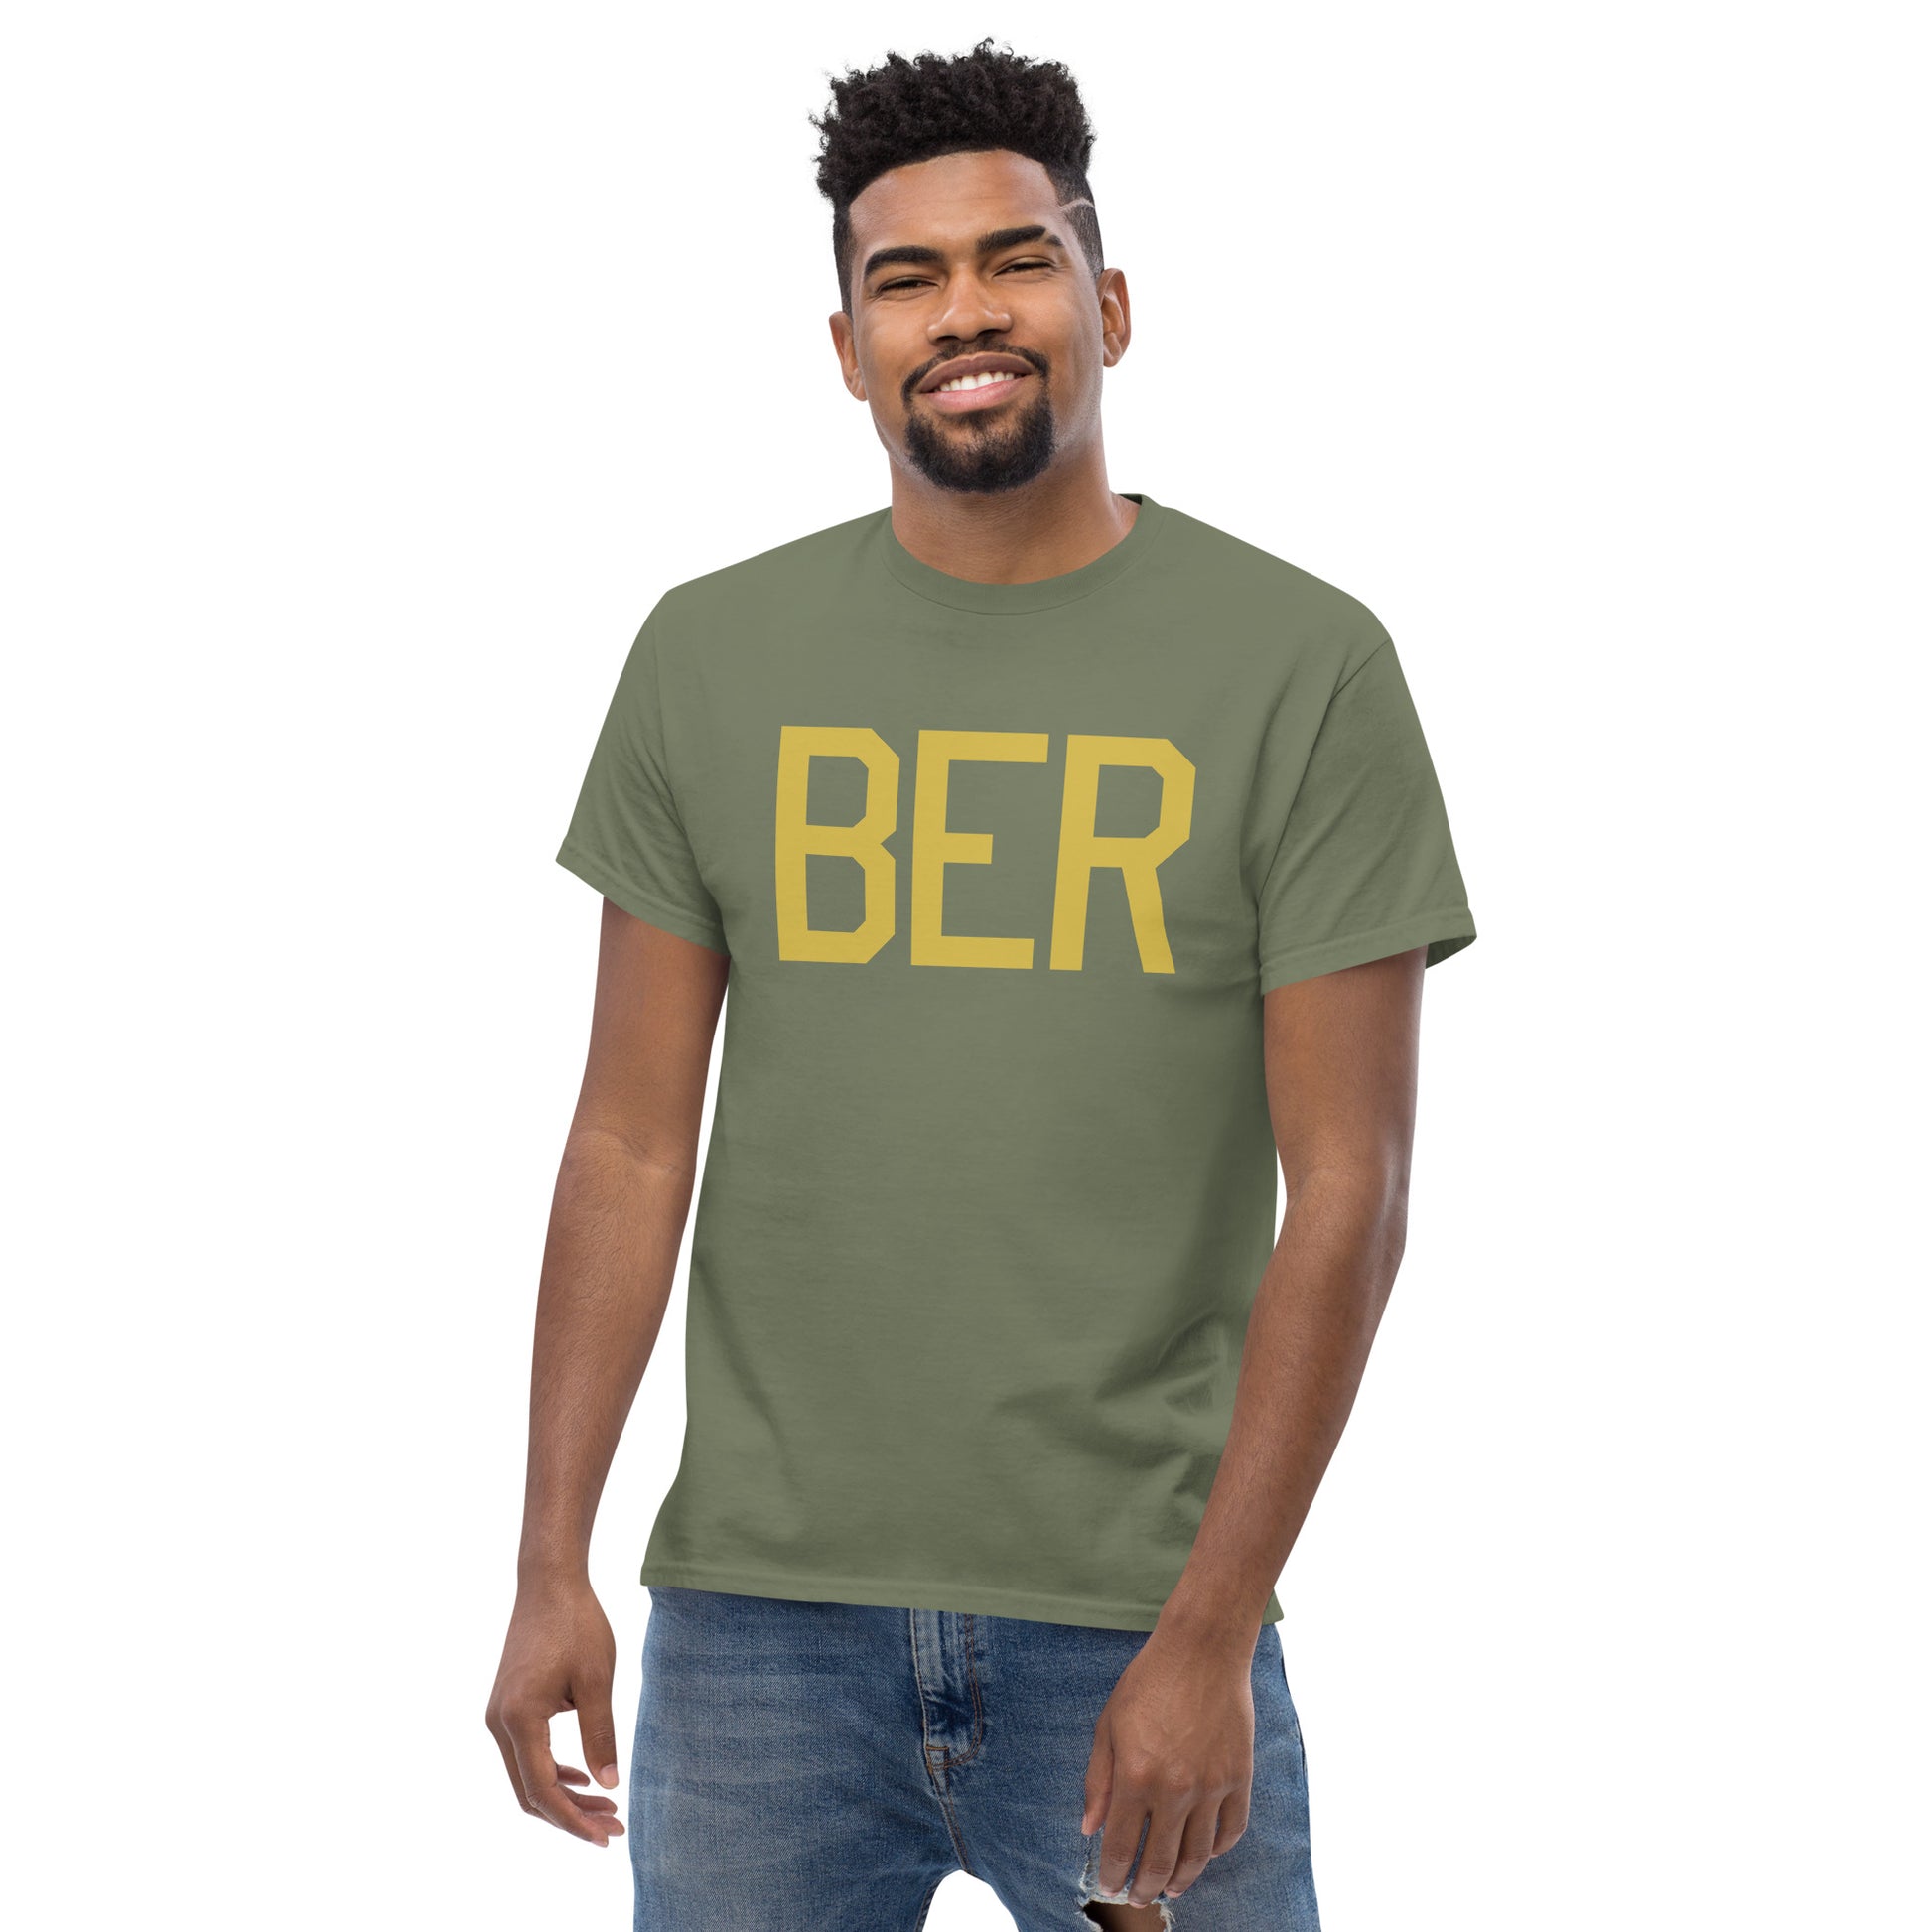 Aviation Enthusiast Men's Tee - Old Gold Graphic • BER Berlin • YHM Designs - Image 07